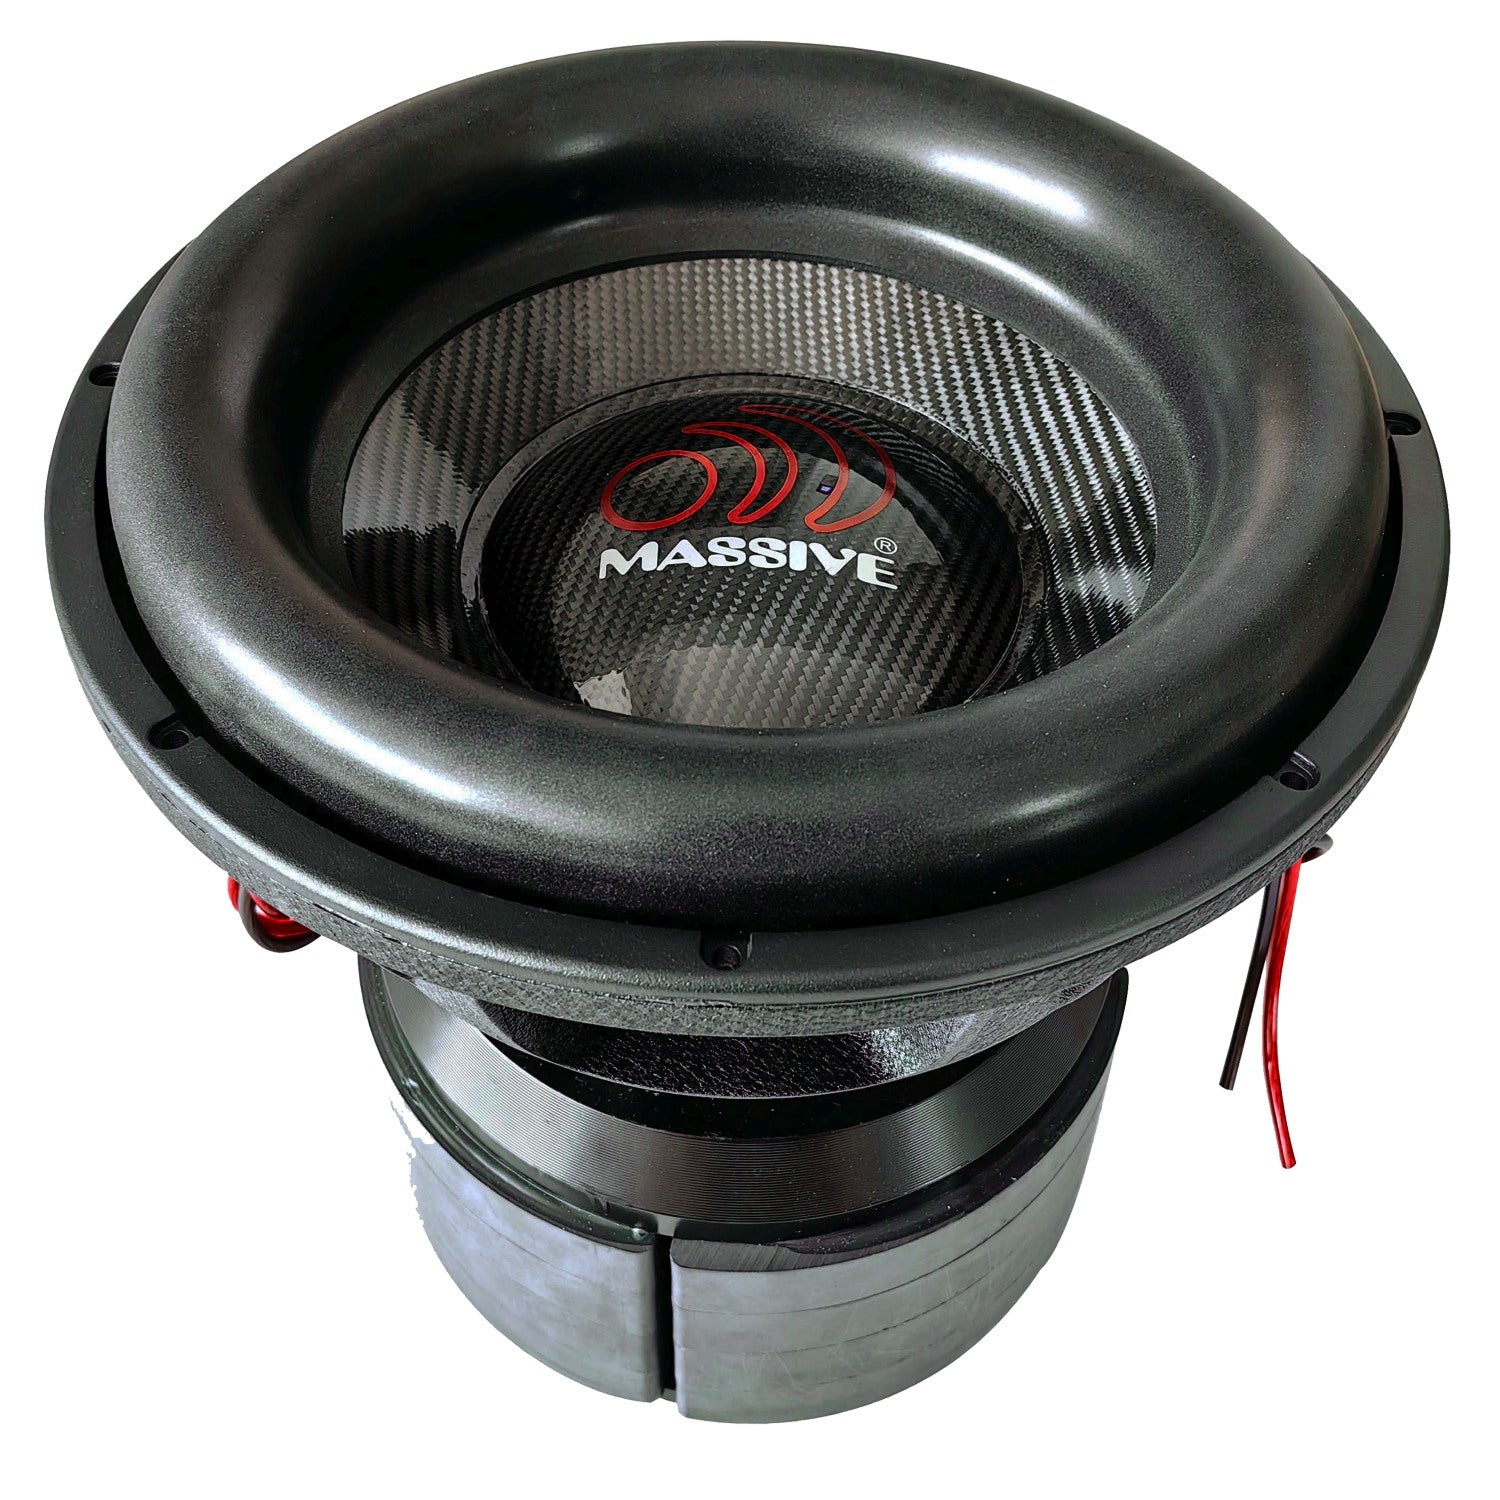 BOA151R - 15" 8,000 Watts RMS Dual 1 Ohm Mega Subwoofer - Caution* Product is 132 Lbs. and Requires Special Handling